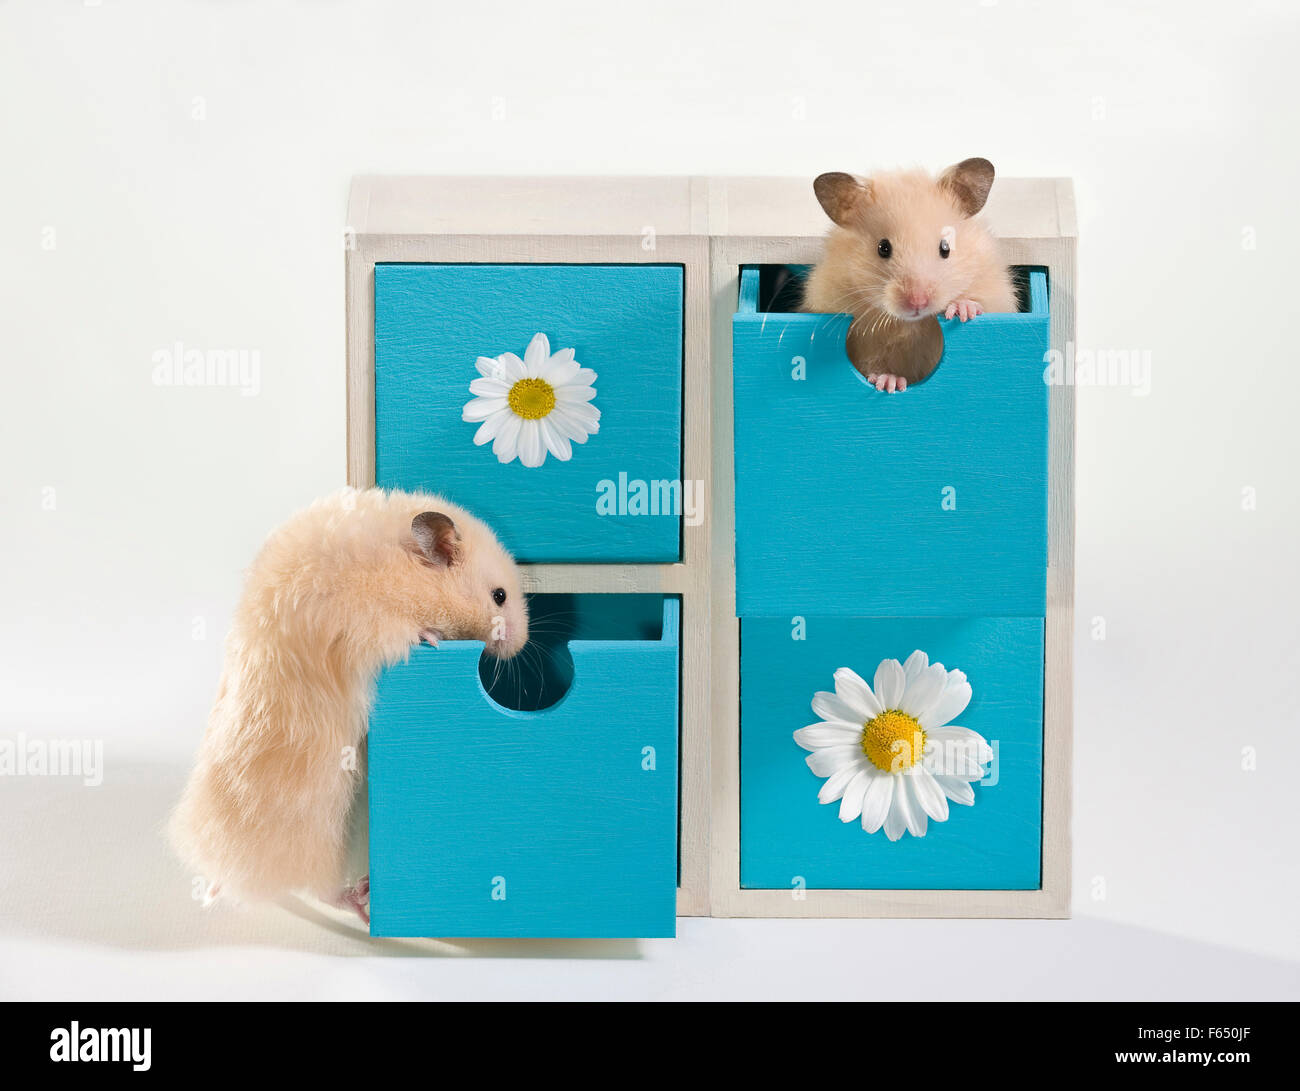 Pair of juvenile Cream Teddy Hamsters in a small blue-and-white drawer cabinet. Germany Stock Photo